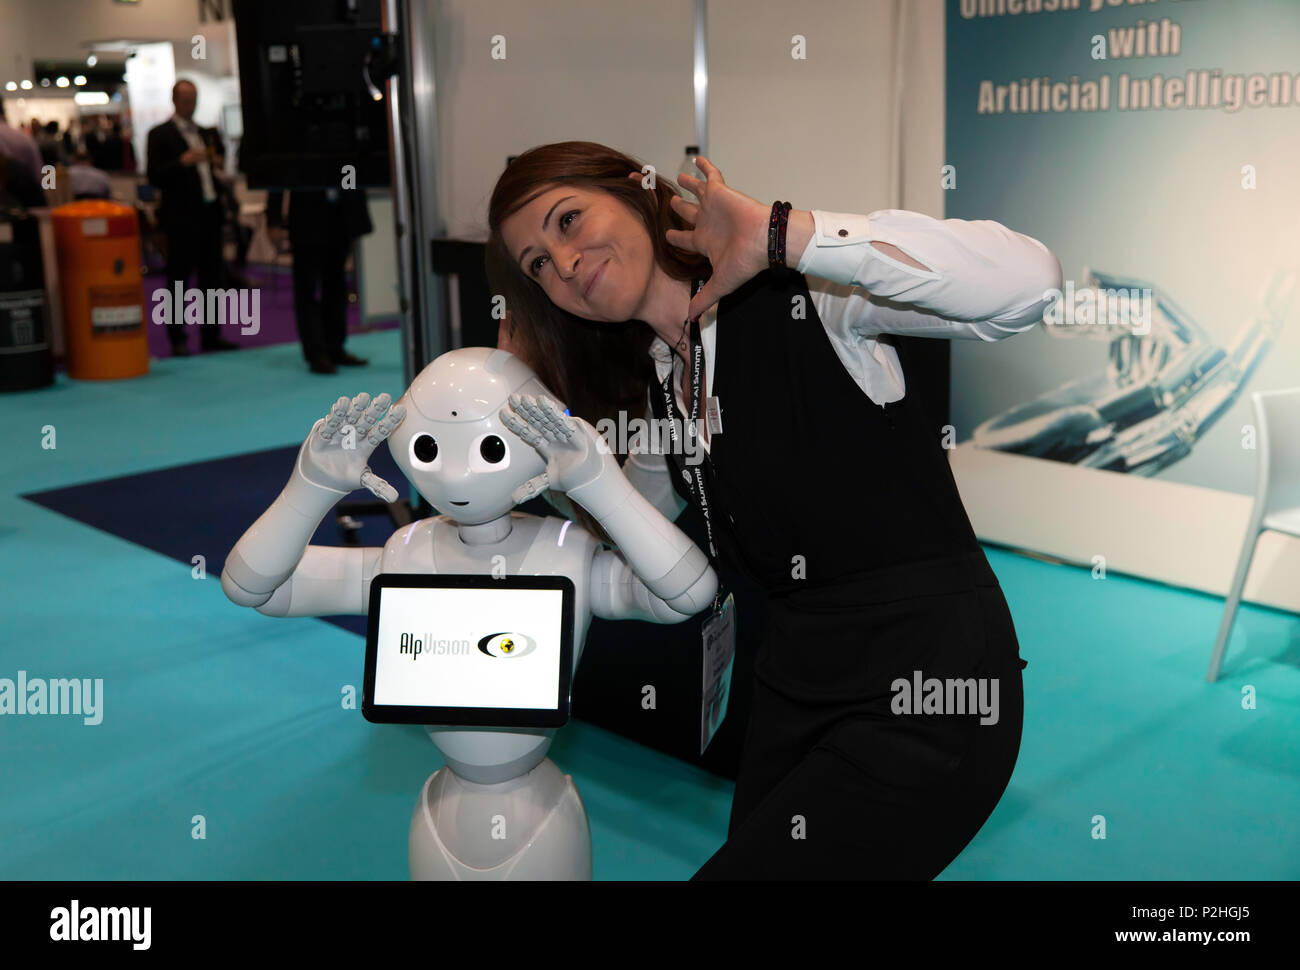 Pepper, a humanoid social robot, poses for a selfie with a  female delegate on the AlpVision stand at the 2018 AI Summit, Stock Photo